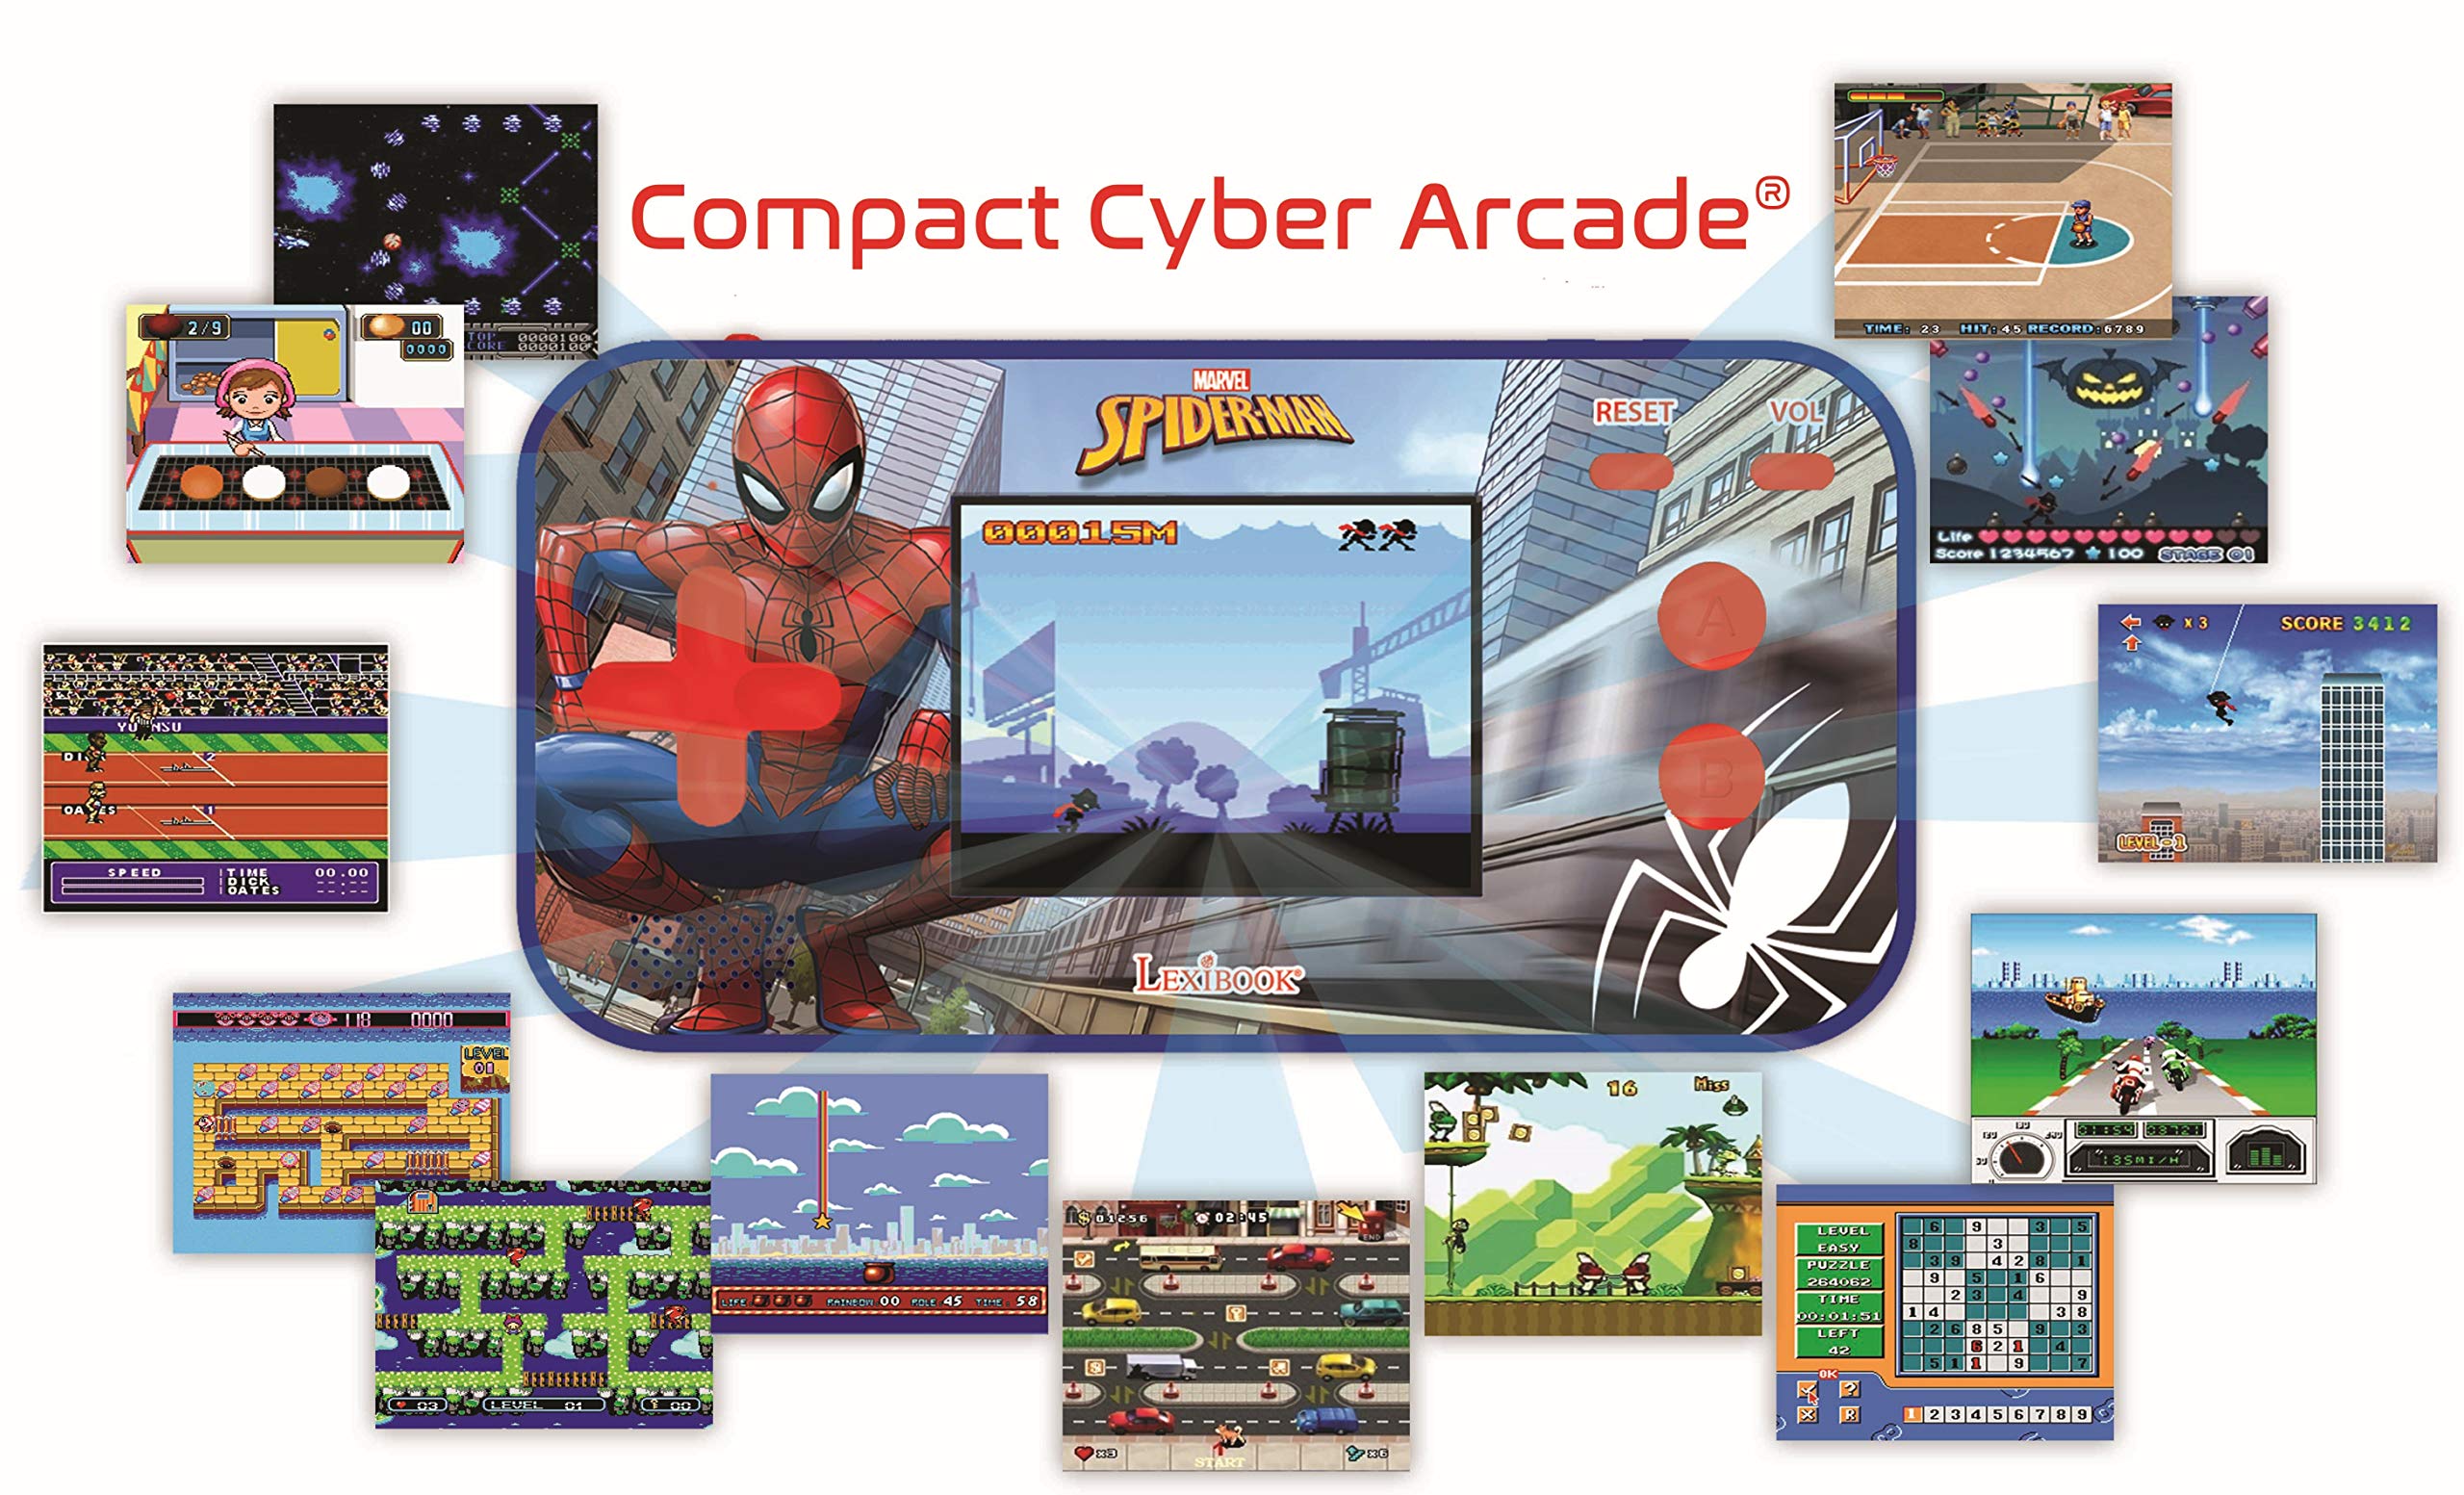 LEXiBOOK Marvel Spider-Man Peter Parker, Compact Cyber Arcade®, Portable Gaming Console, 150 Games, LCD Colour Screen, Battery Operated, Blue, JL2367SP